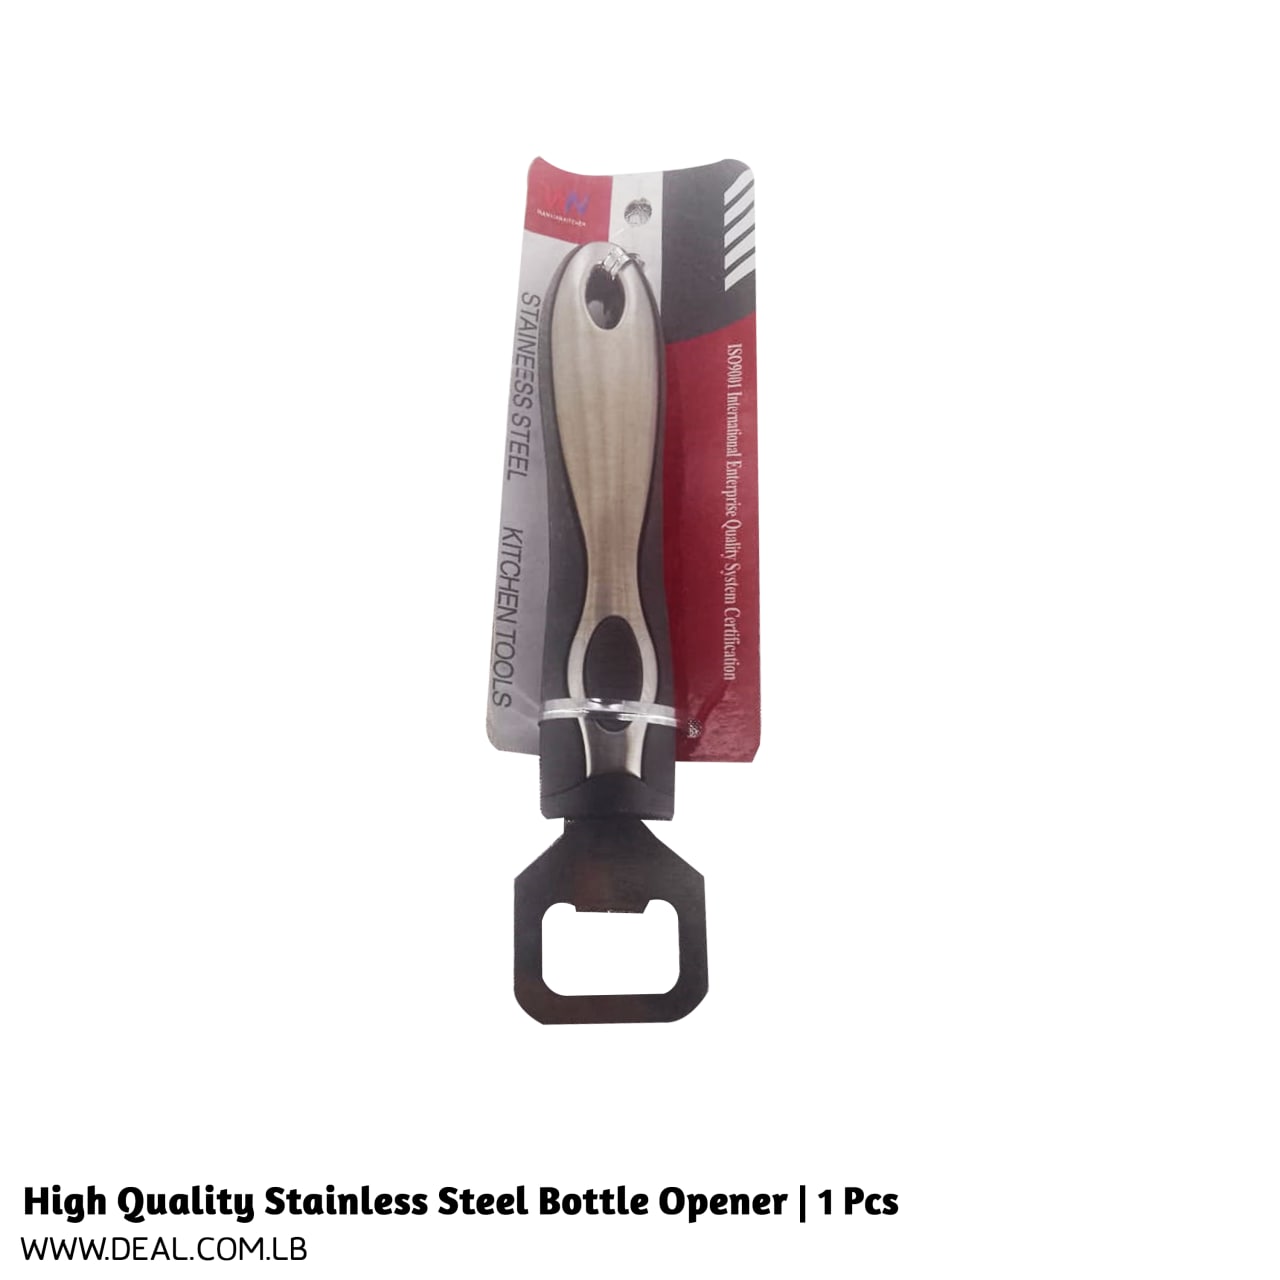 High Quality Stainless Steel Bottle Opener | 1 Pcs